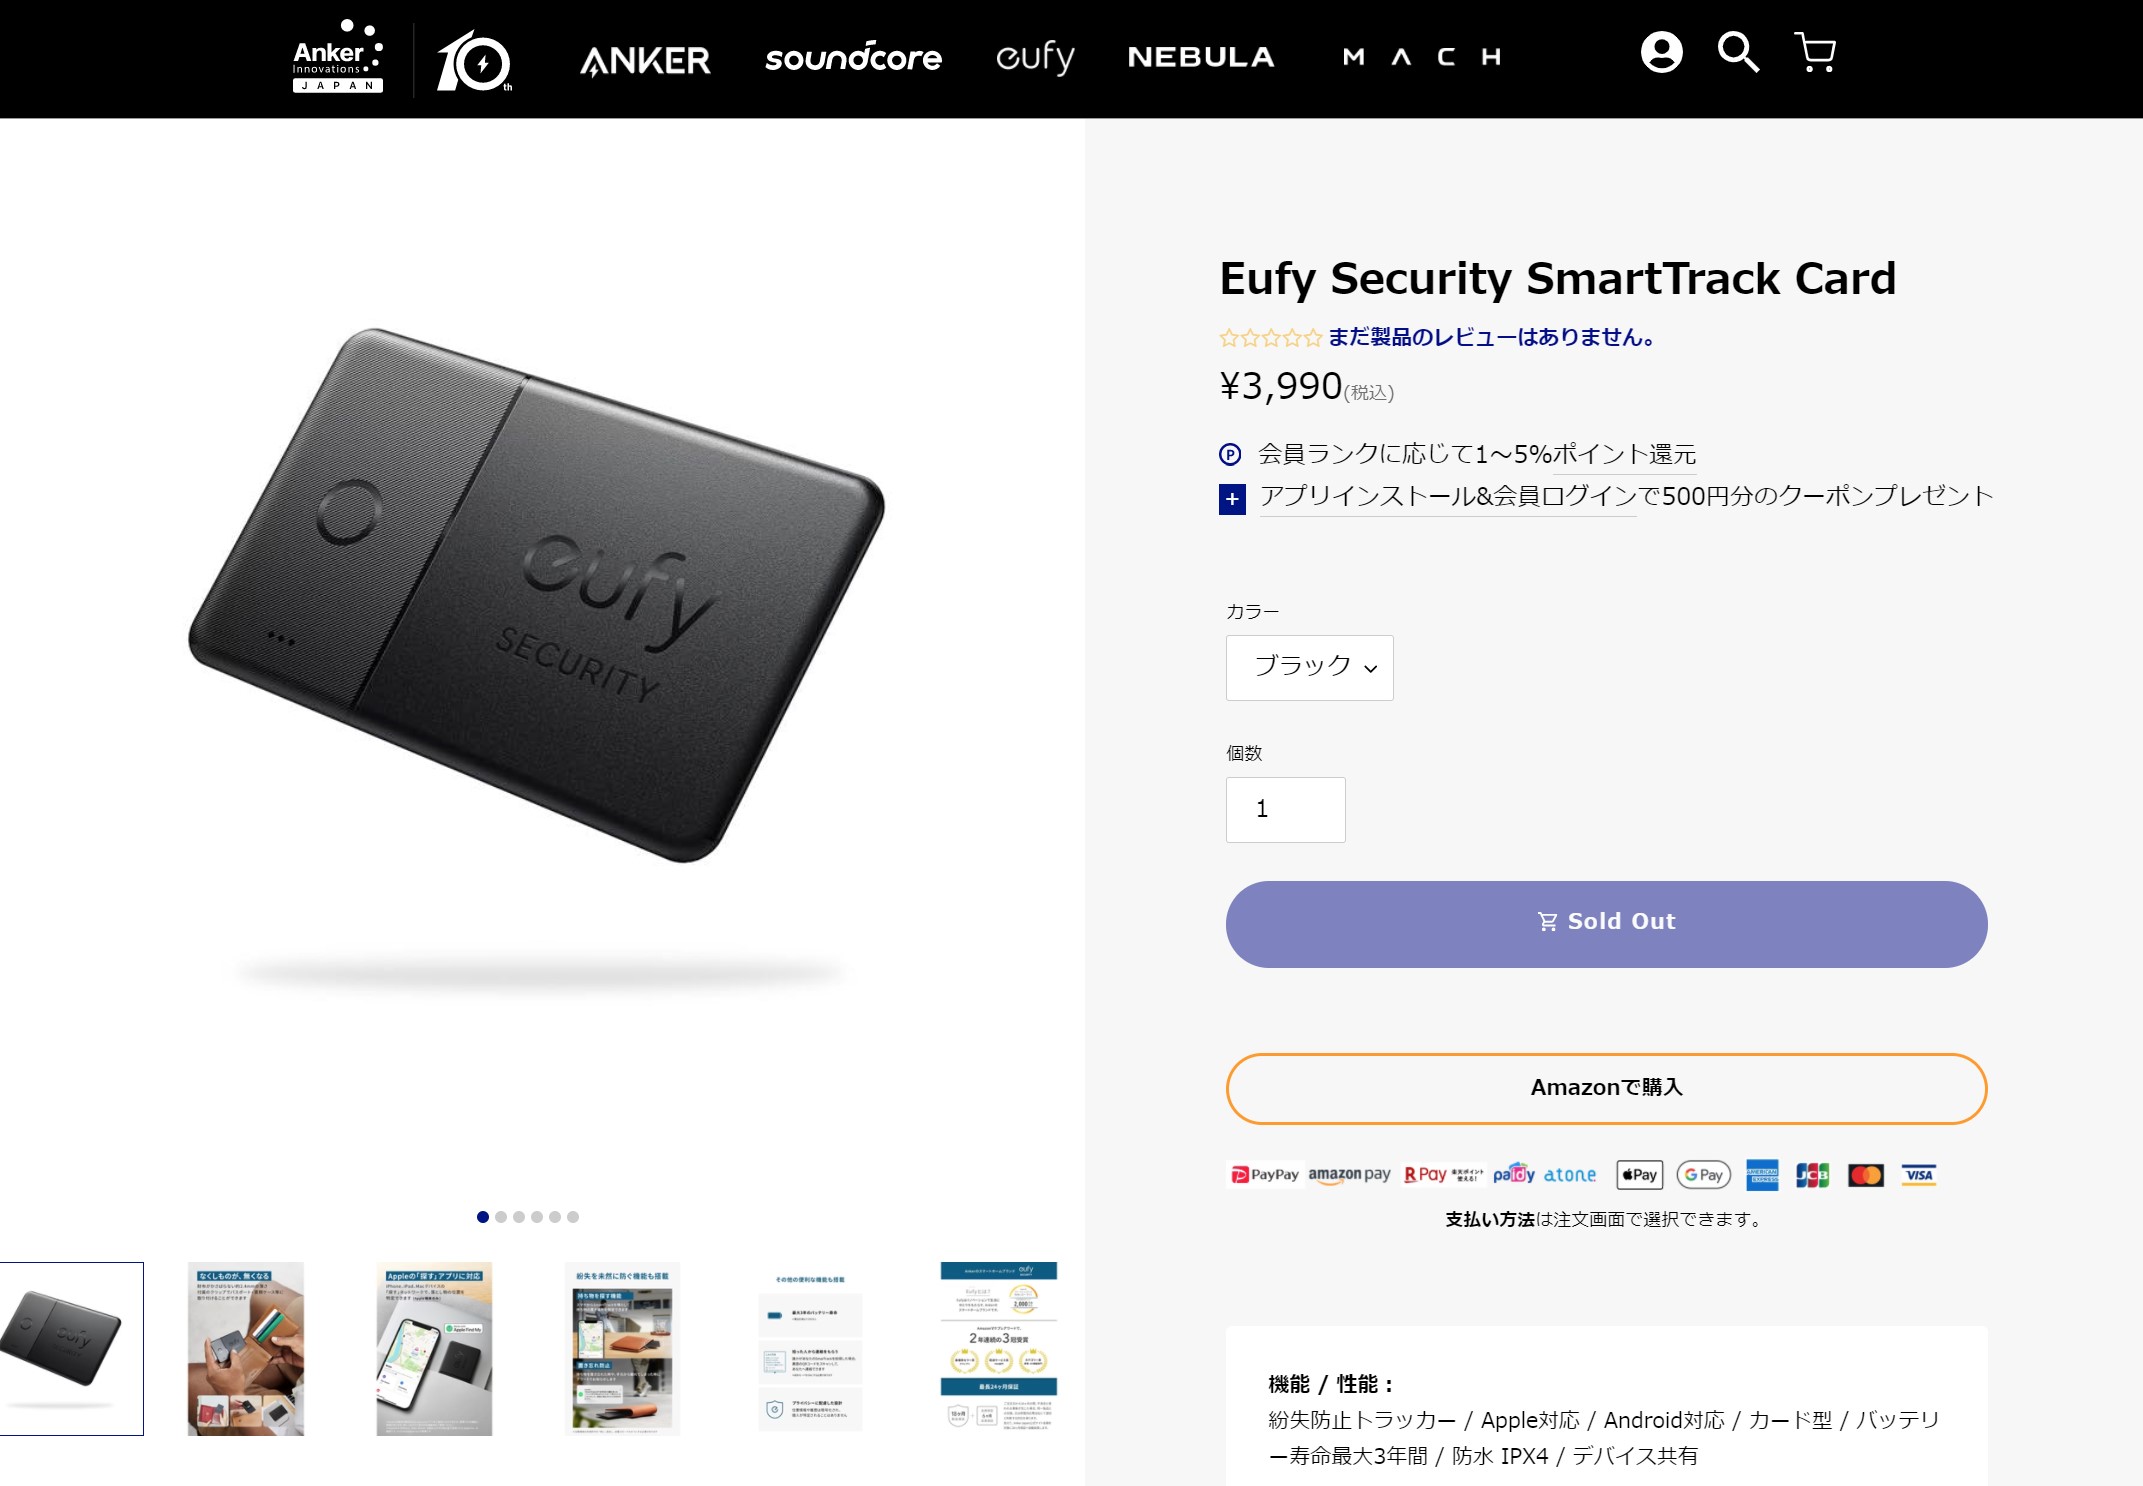 Anker Eufy Security SmartTrack Cardの魅力を紹介！